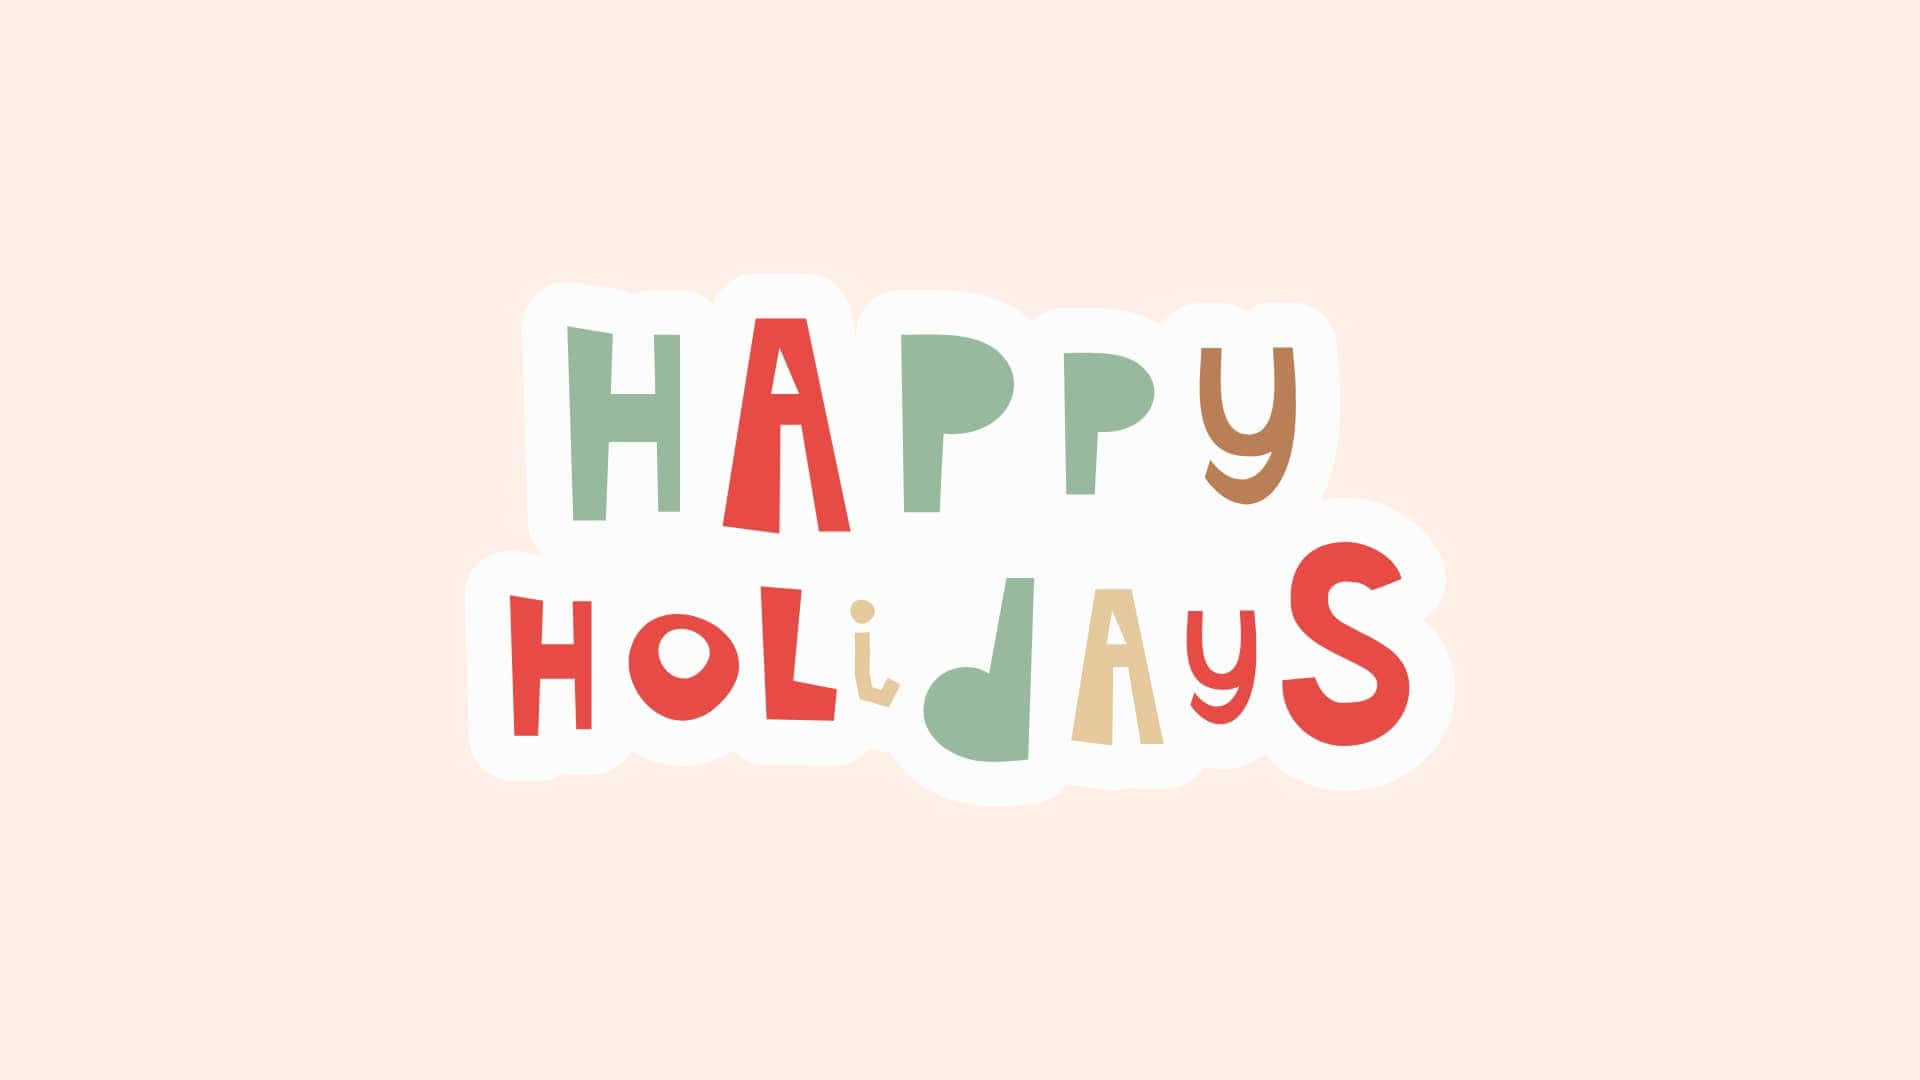 Happy Holidays Colorful Lettering Wallpaper